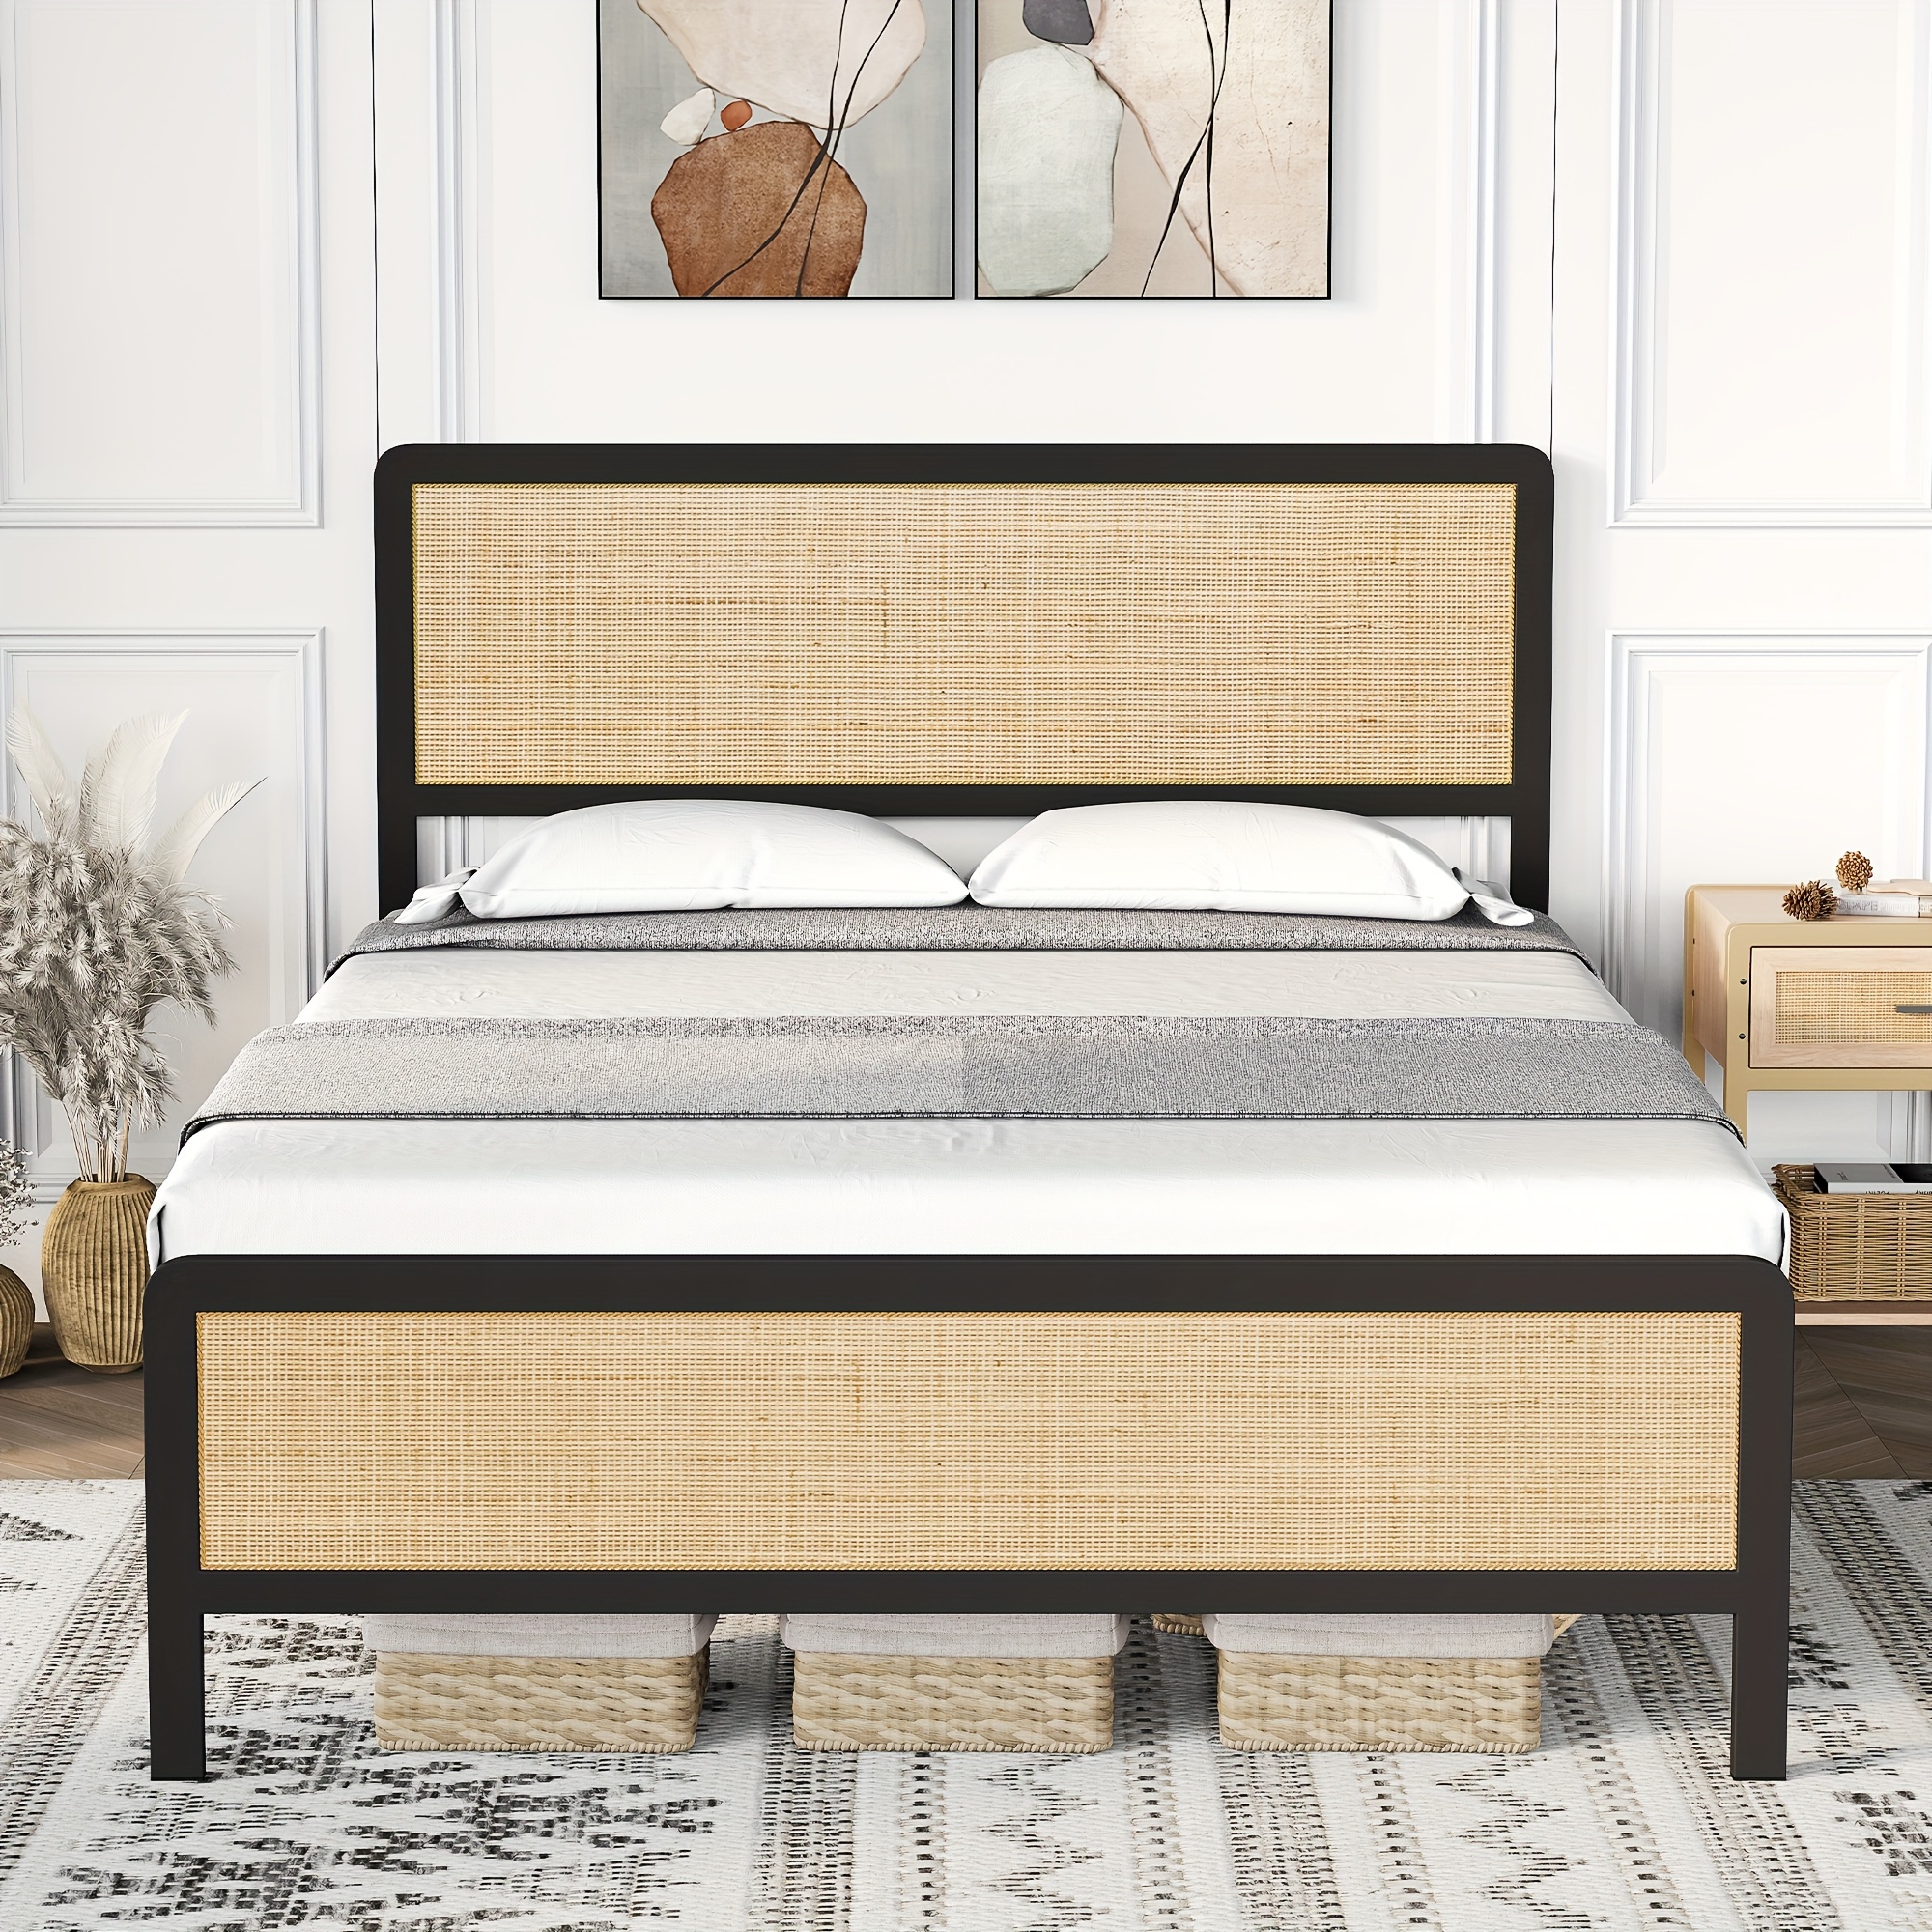 

1pc 2 Size Bed Frame With Rattan Headboard And Footboard, Platform Bed Frame With Safe Rounded Corners, Strong Metal Slats Support, Mattress Foundation, Noise-free, No Box Spring Needed